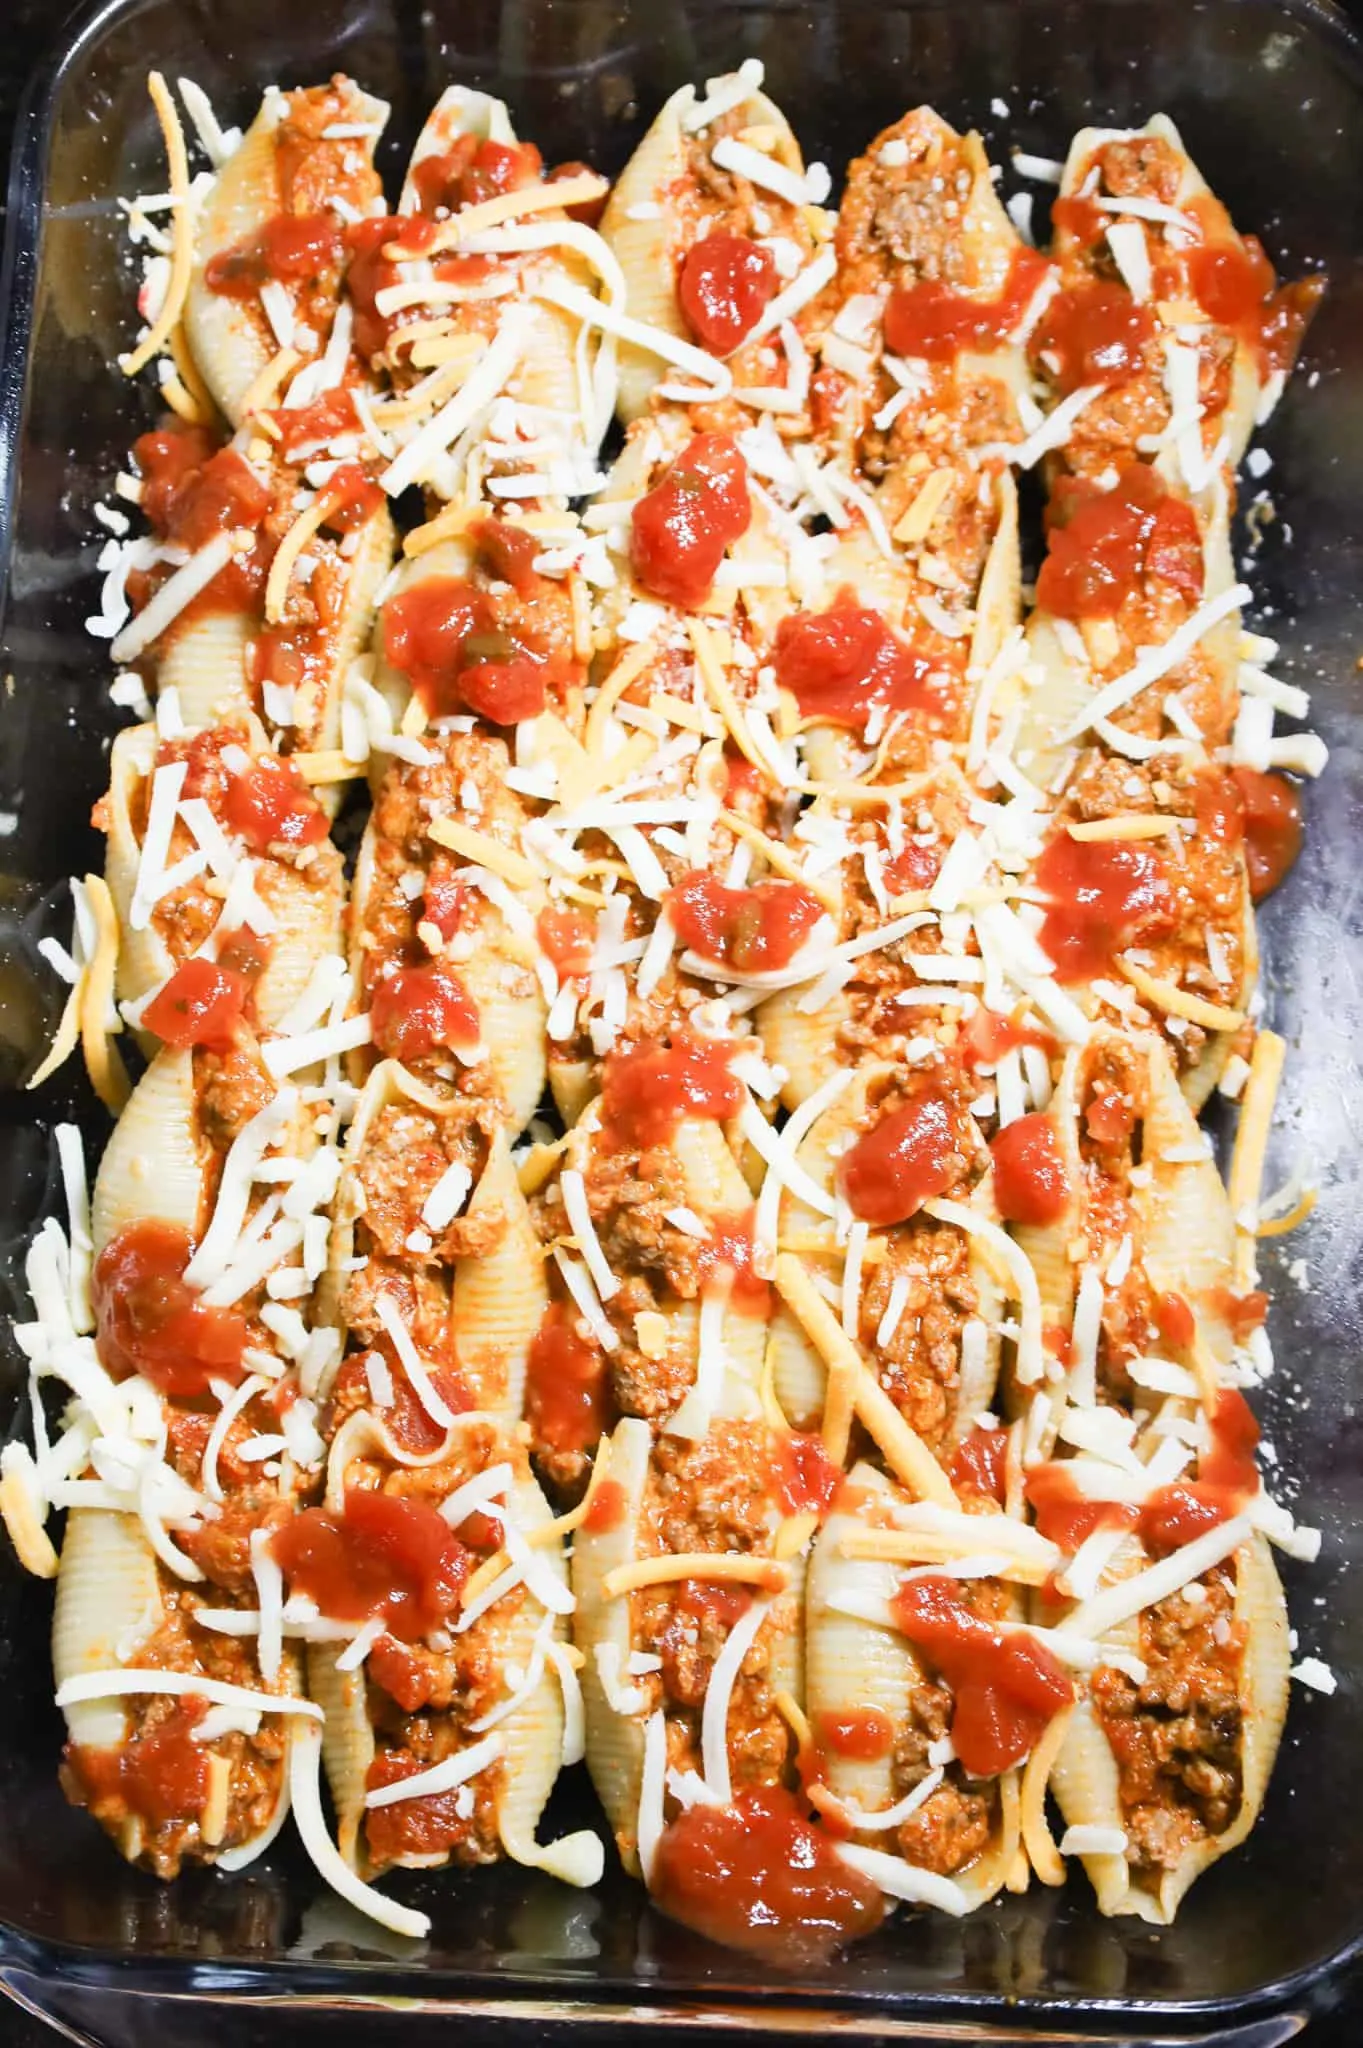 salsa and shredded cheese on top of taco stuffed shells on top of a baking dish